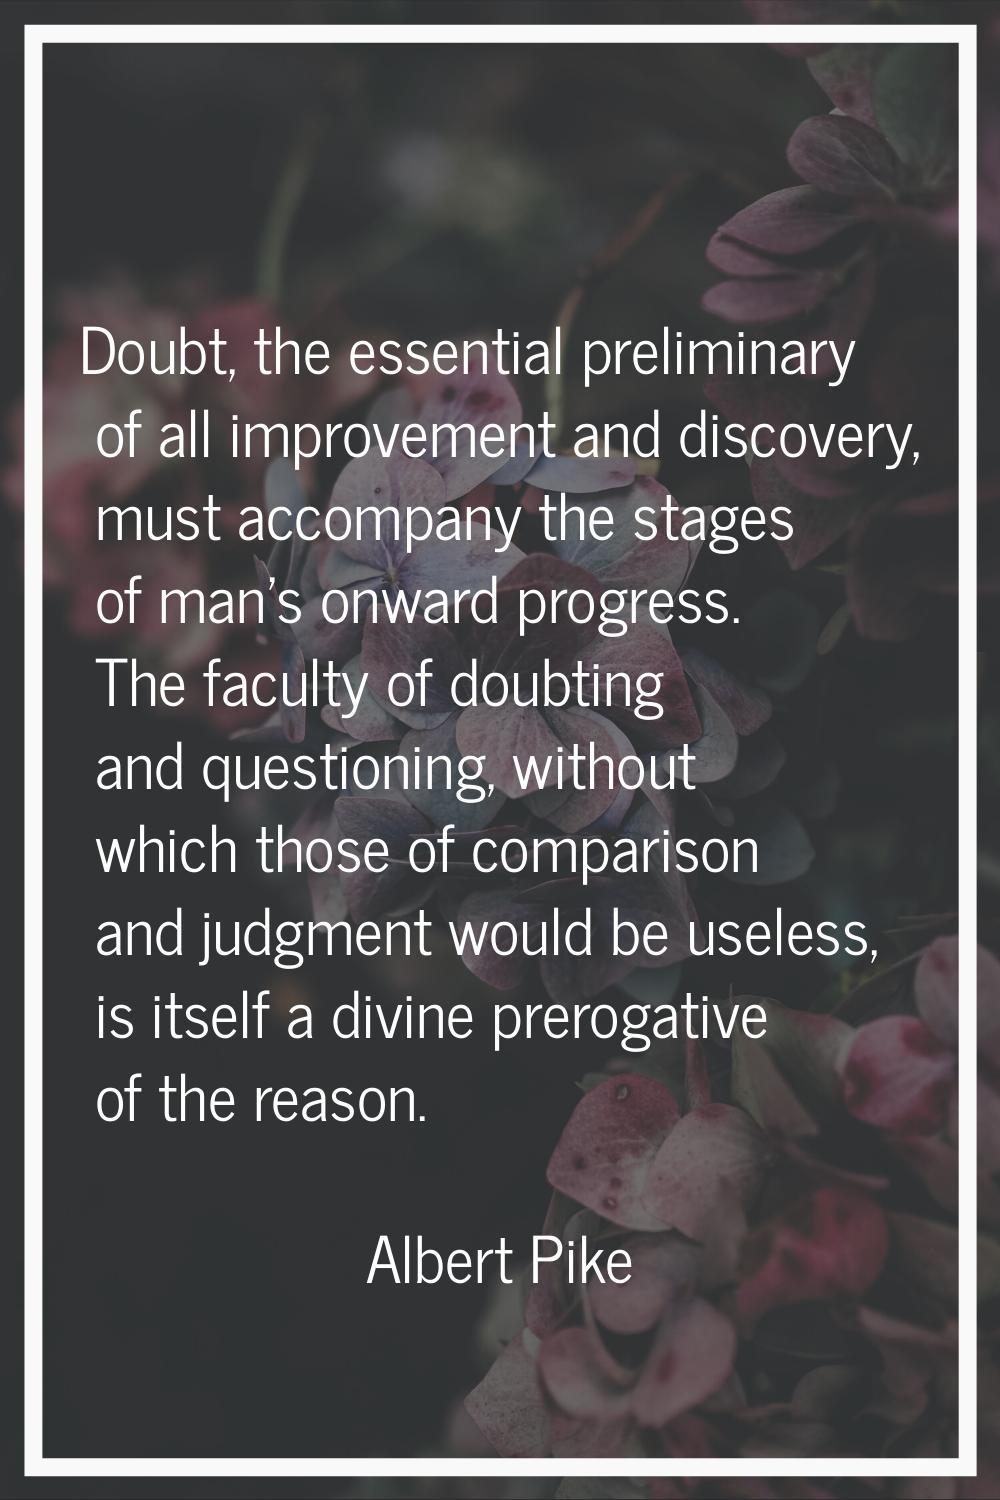 Doubt, the essential preliminary of all improvement and discovery, must accompany the stages of man